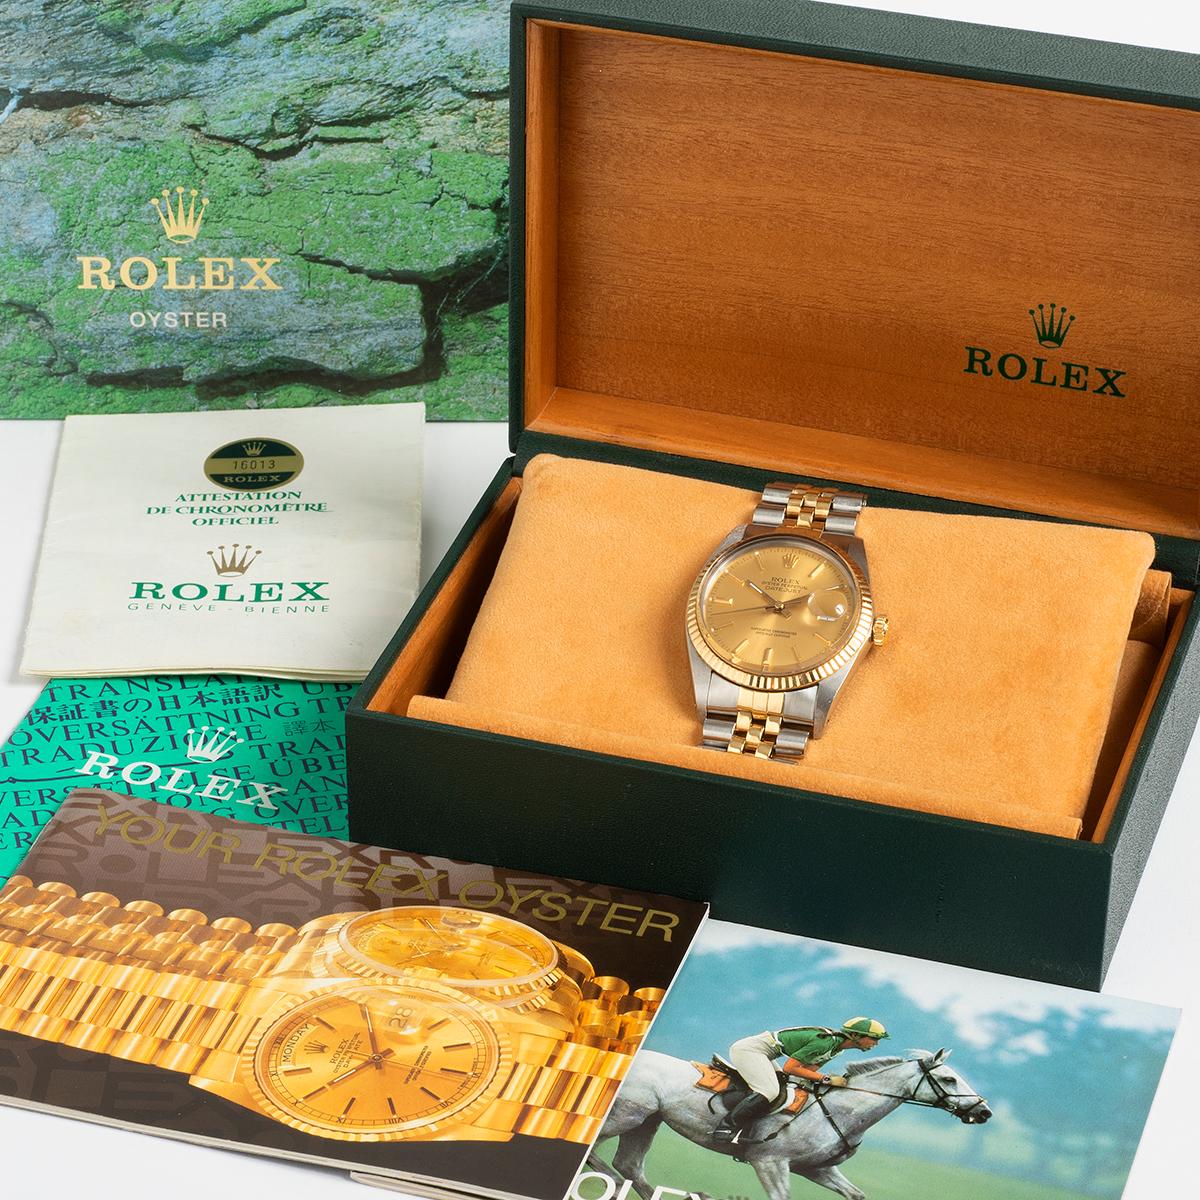 Our vintage Rolex Datejust 36mm, reference 16013, from the 1980s features the most iconic combination of stainless steel and 18k yellow gold case and jubilee bracelet with champagne baton dial. A complete set, our example comes with inner and outer